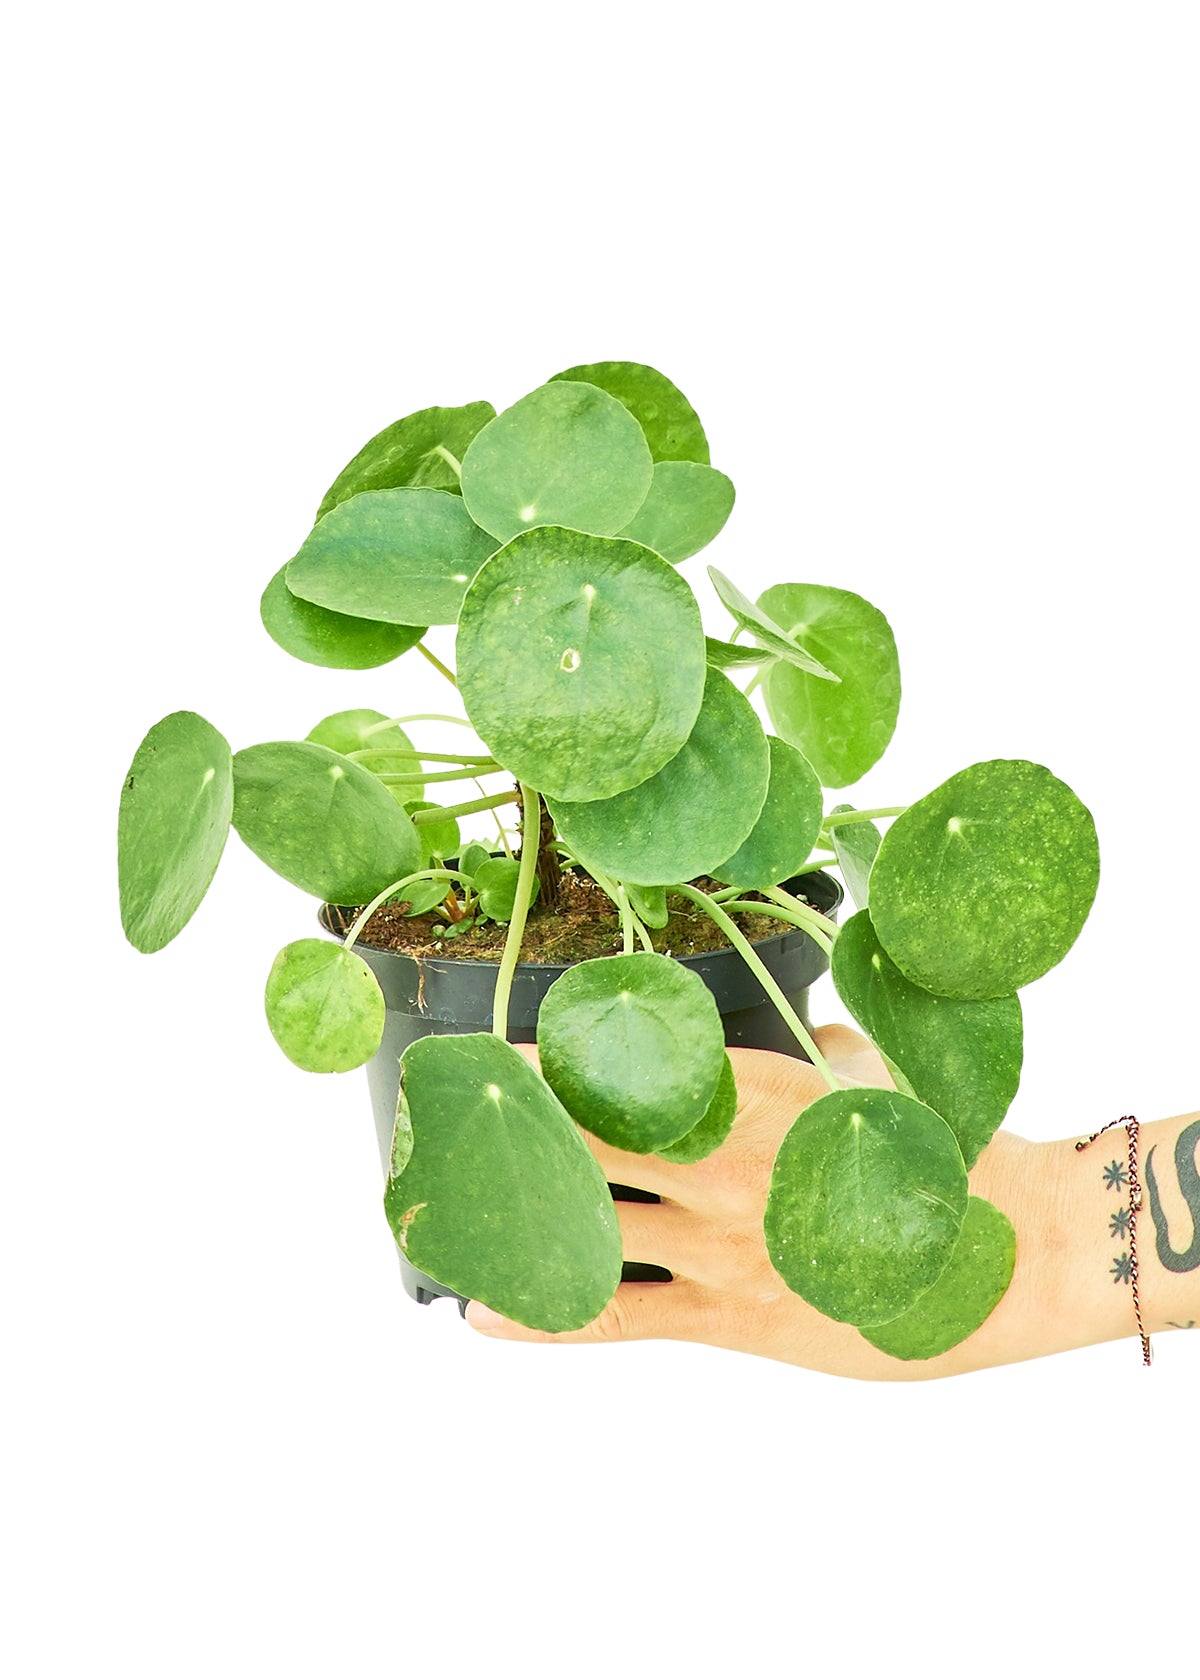 Medium size Chinese Money Plant in a growers pot with a white background with a hand holding the pot